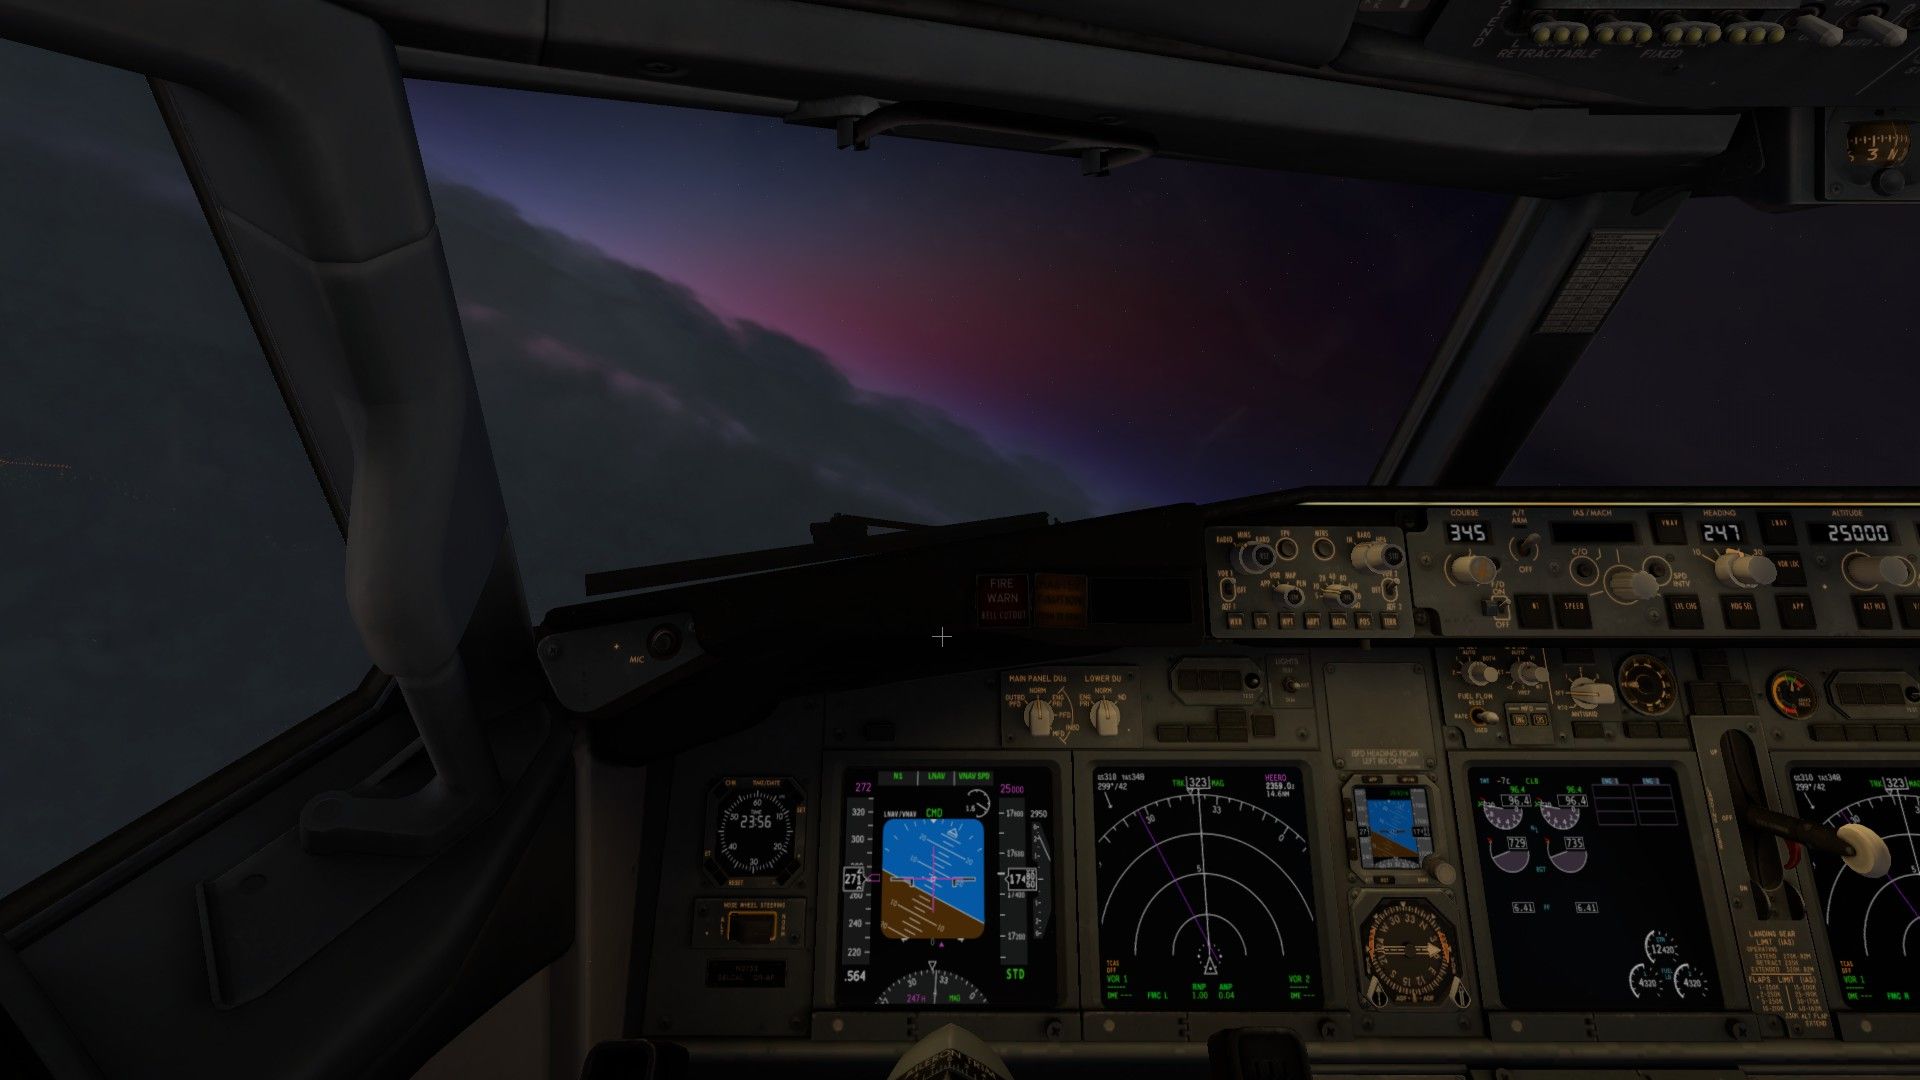 Some XPLANE 11 picture. Topic Tech Tips